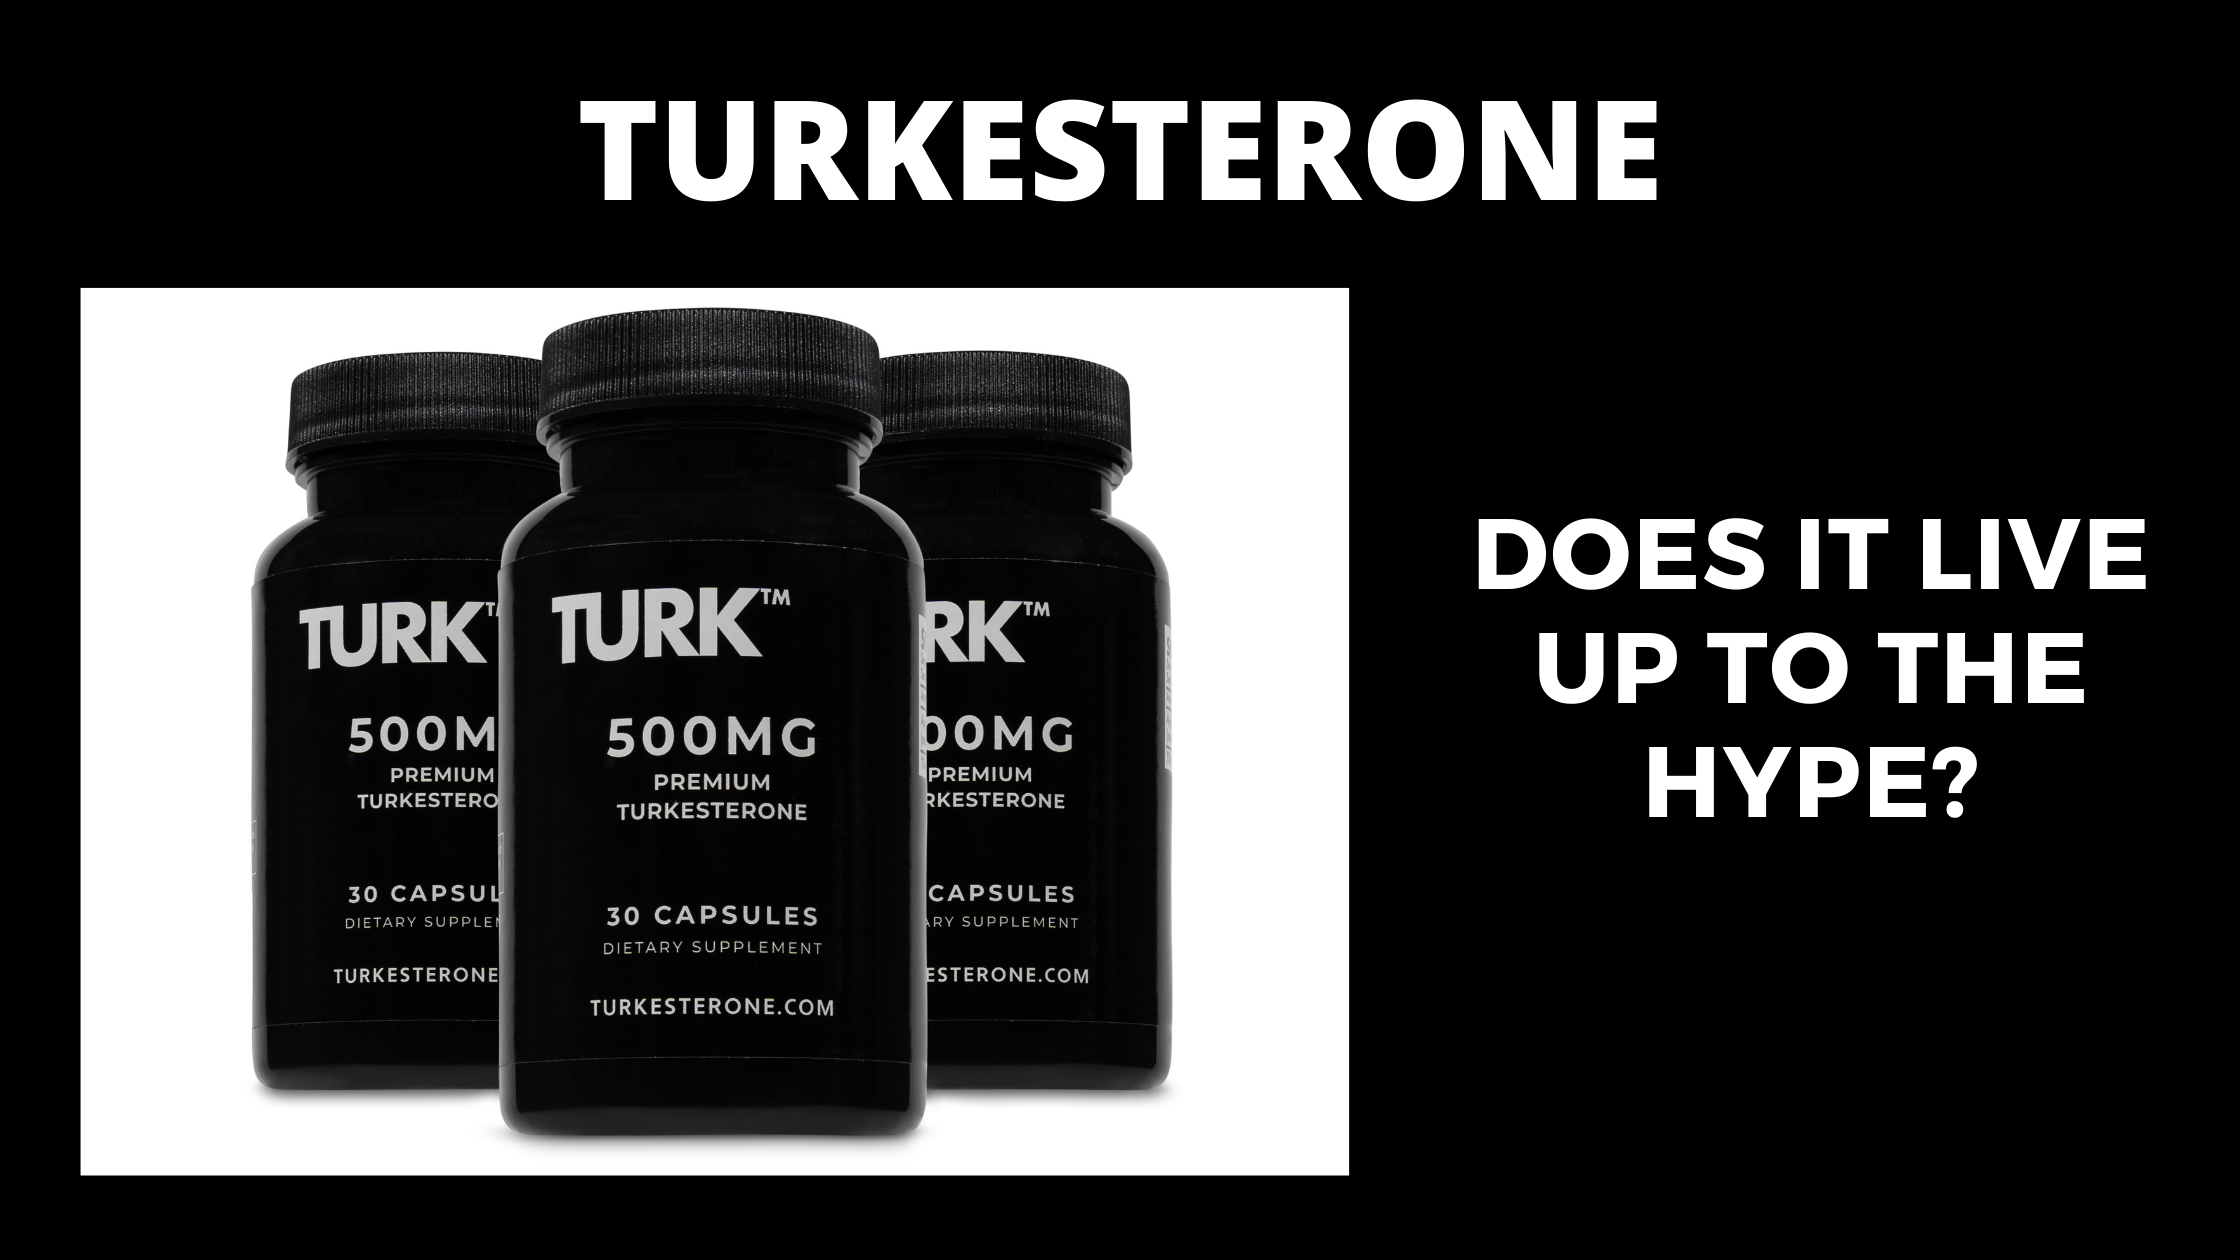 Turkesterone for Strength & Recovery: Does It Live Up to The Hype?